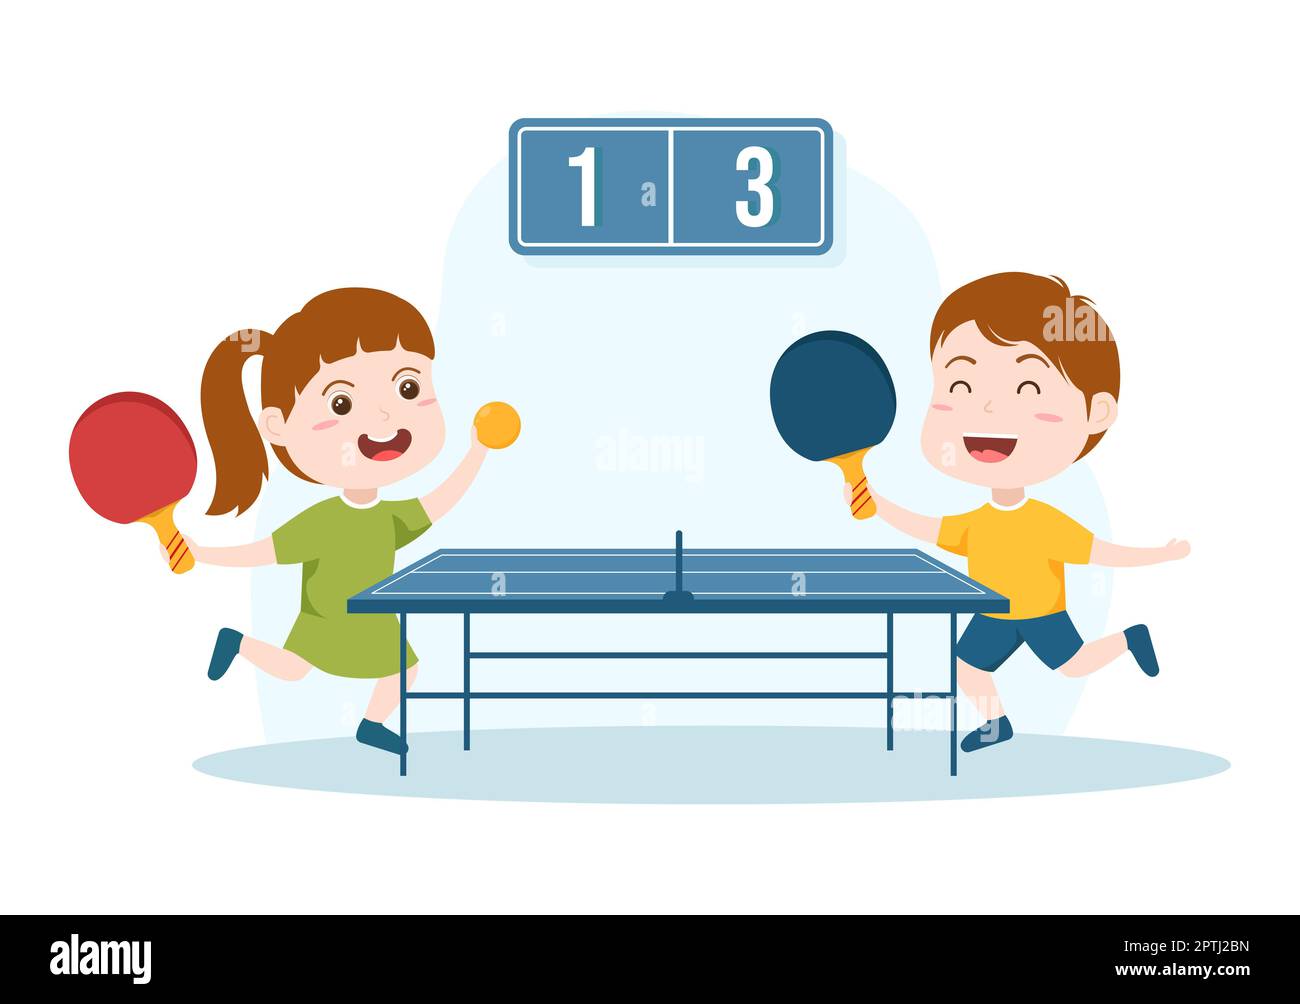 https://c8.alamy.com/comp/2PTJ2BN/cute-kids-playing-table-tennis-sports-with-racket-and-ball-of-ping-pong-game-match-in-flat-cartoon-hand-drawn-templates-illustration-2PTJ2BN.jpg